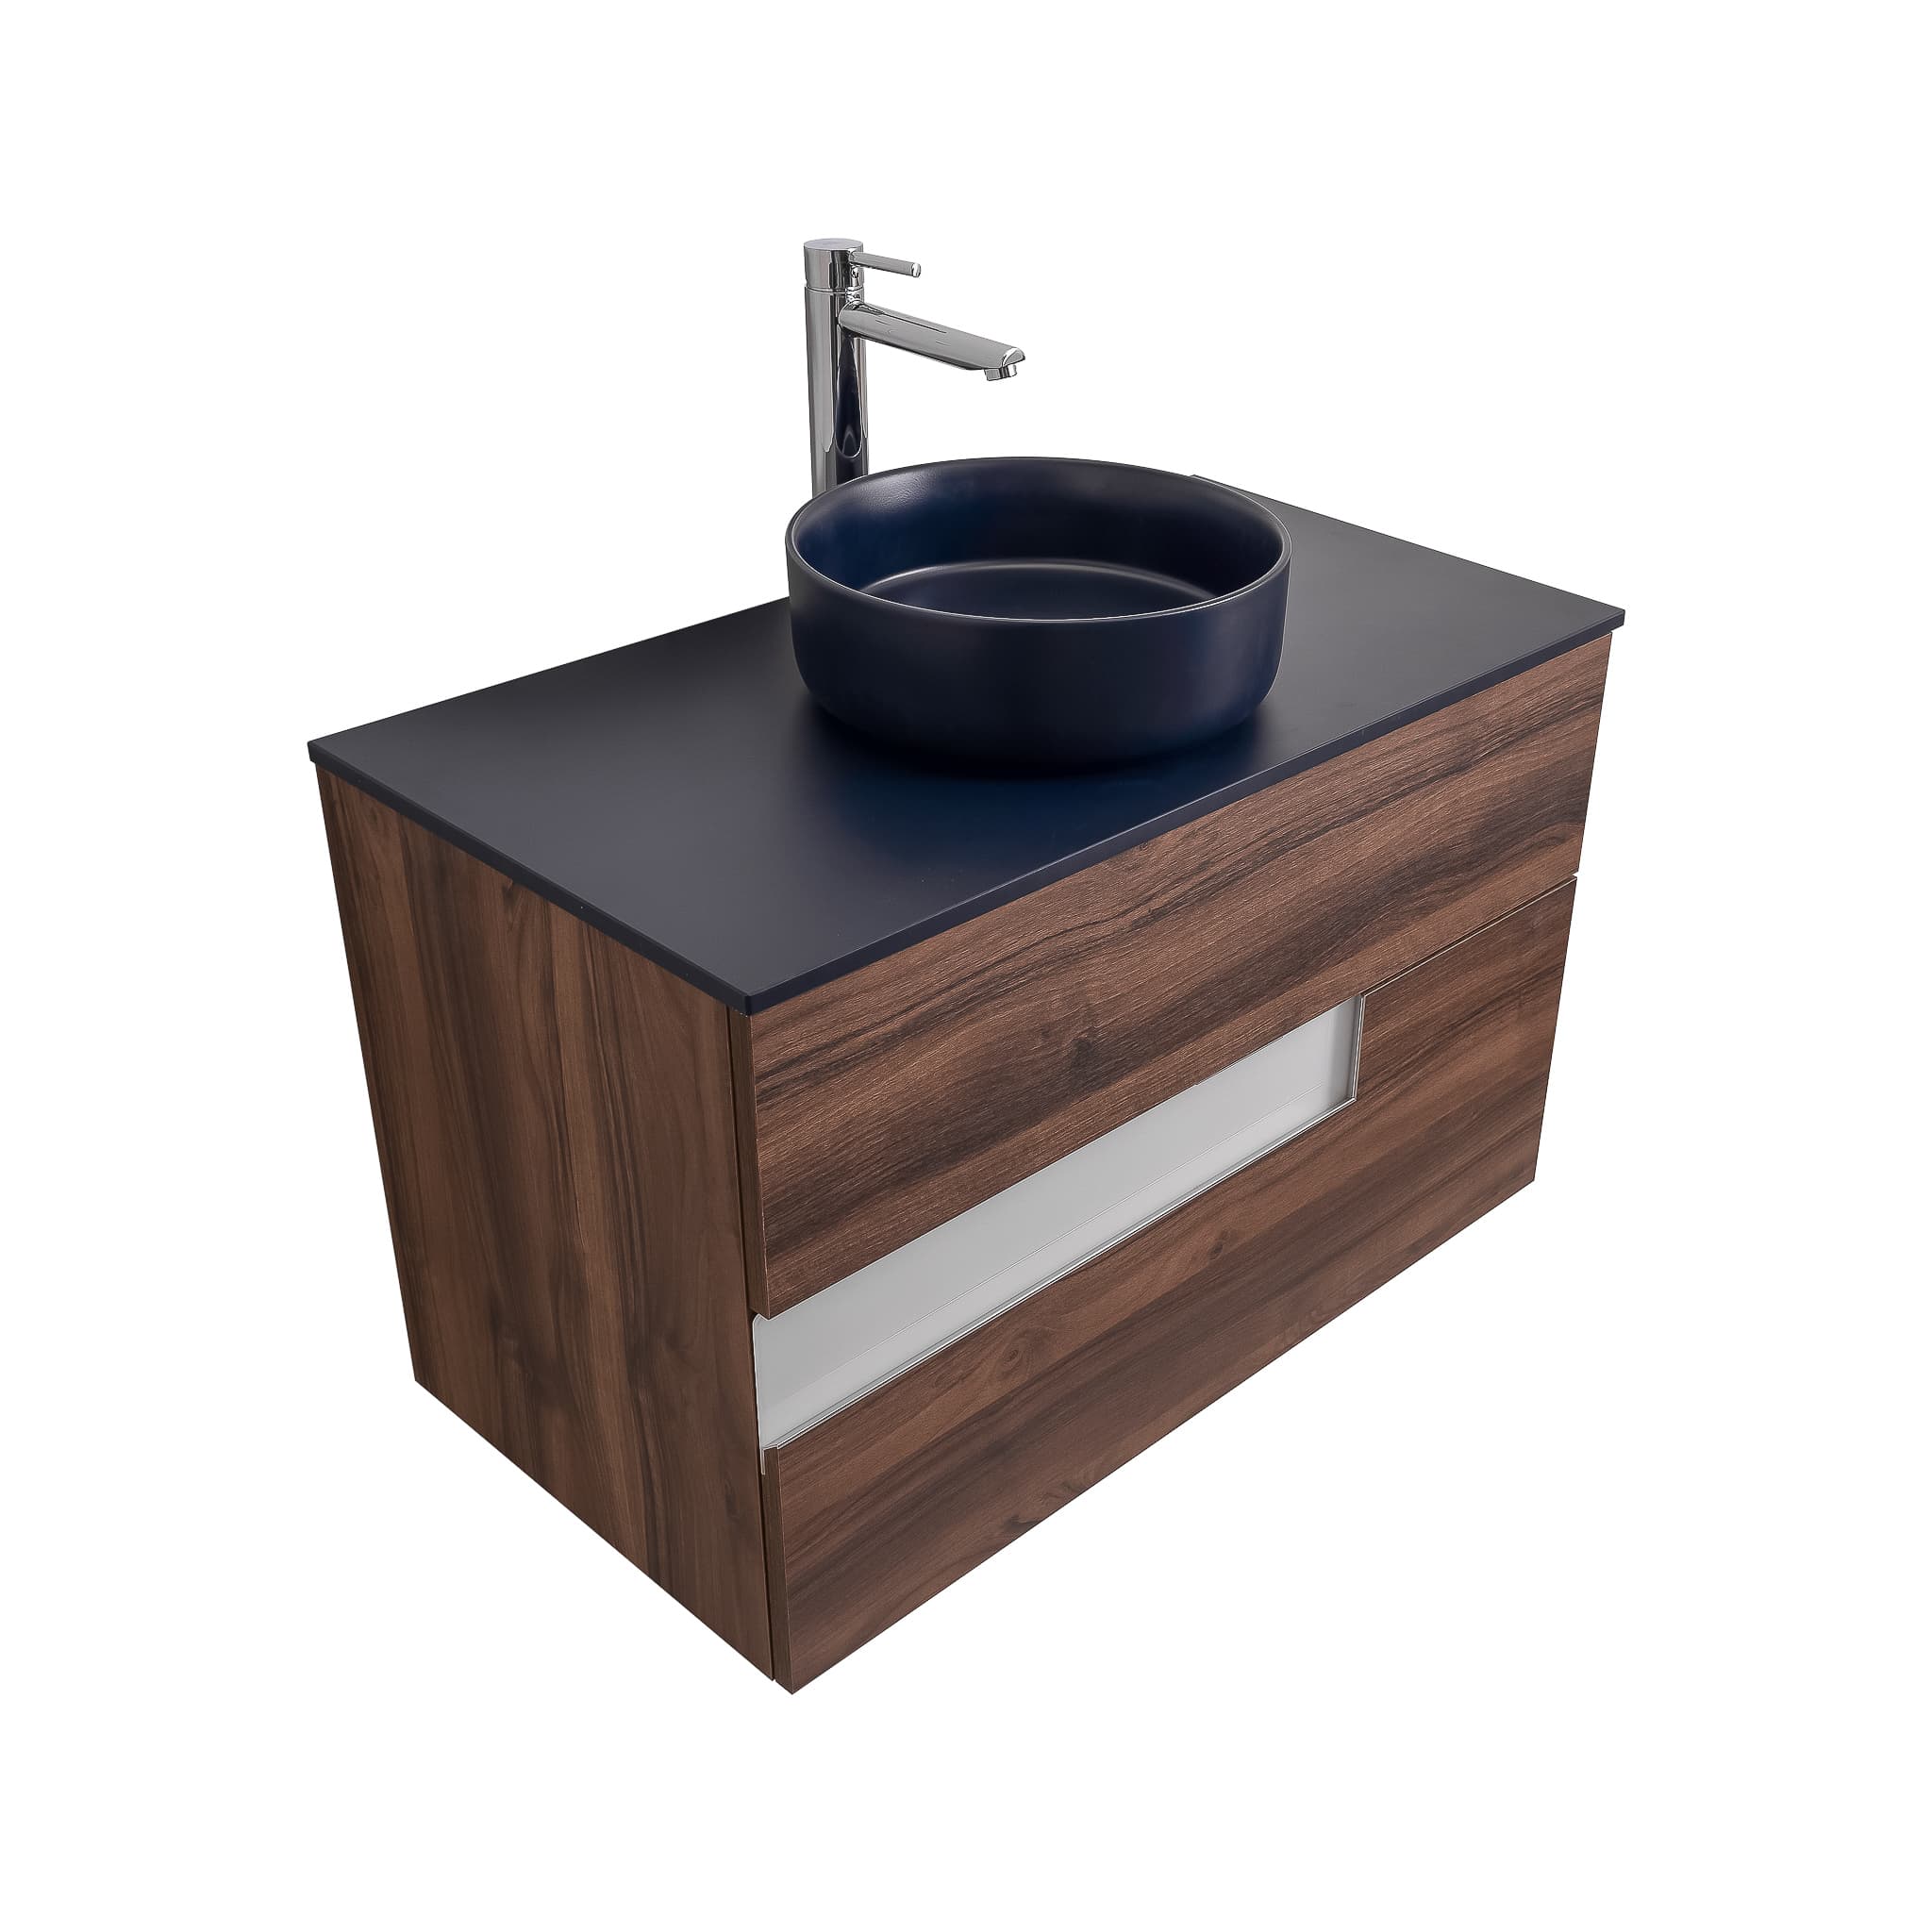 Vision 35.5 Valenti Medium Brown Wood Cabinet, Ares Navy Blue Top And Ares Navy Blue Ceramic Basin, Wall Mounted Modern Vanity Set